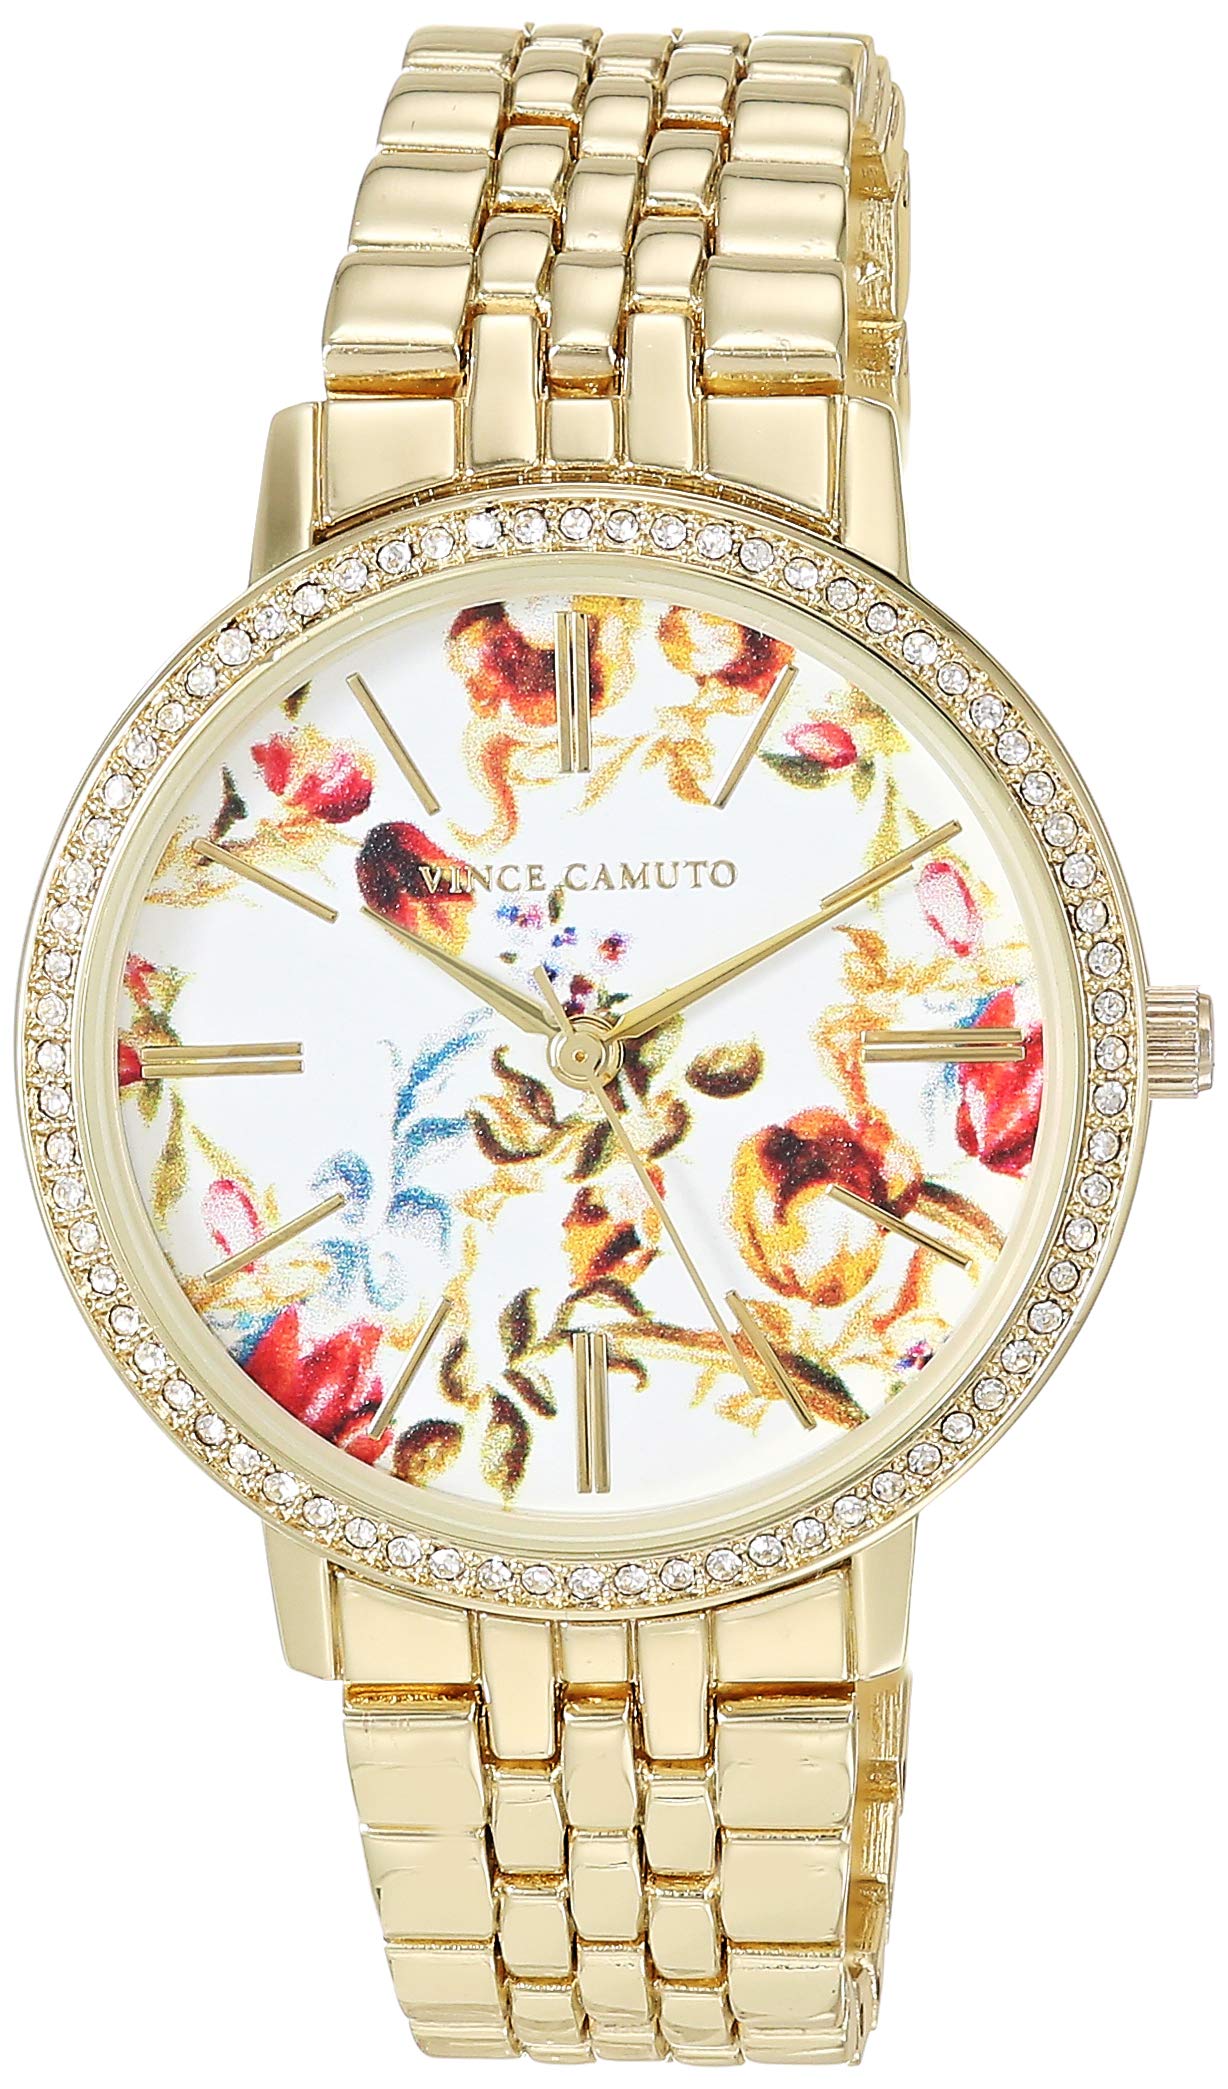 Vince Camuto Women's Crystal Accented Bracelet Watch